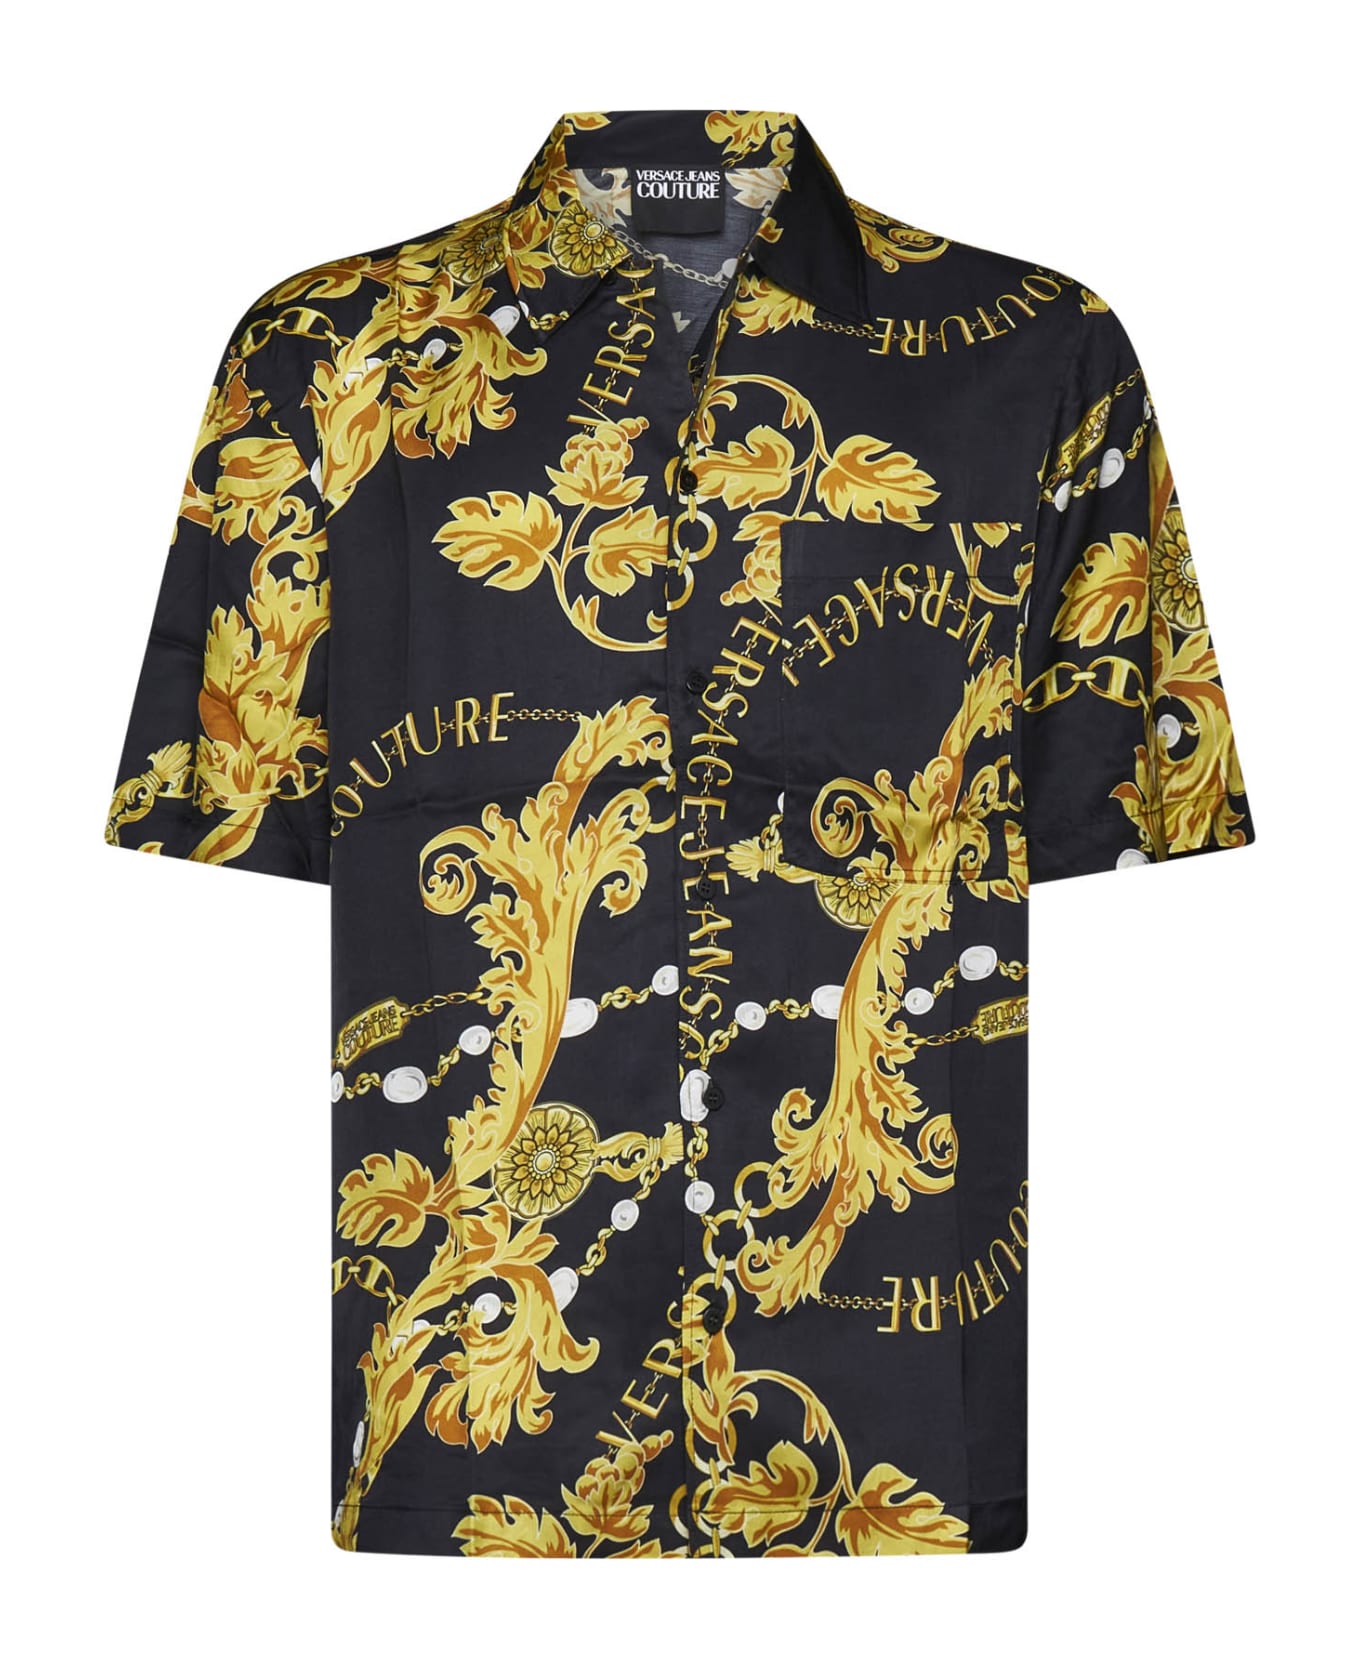 Versace Jeans Couture Baroque Print Shirt - Black gold シャツ